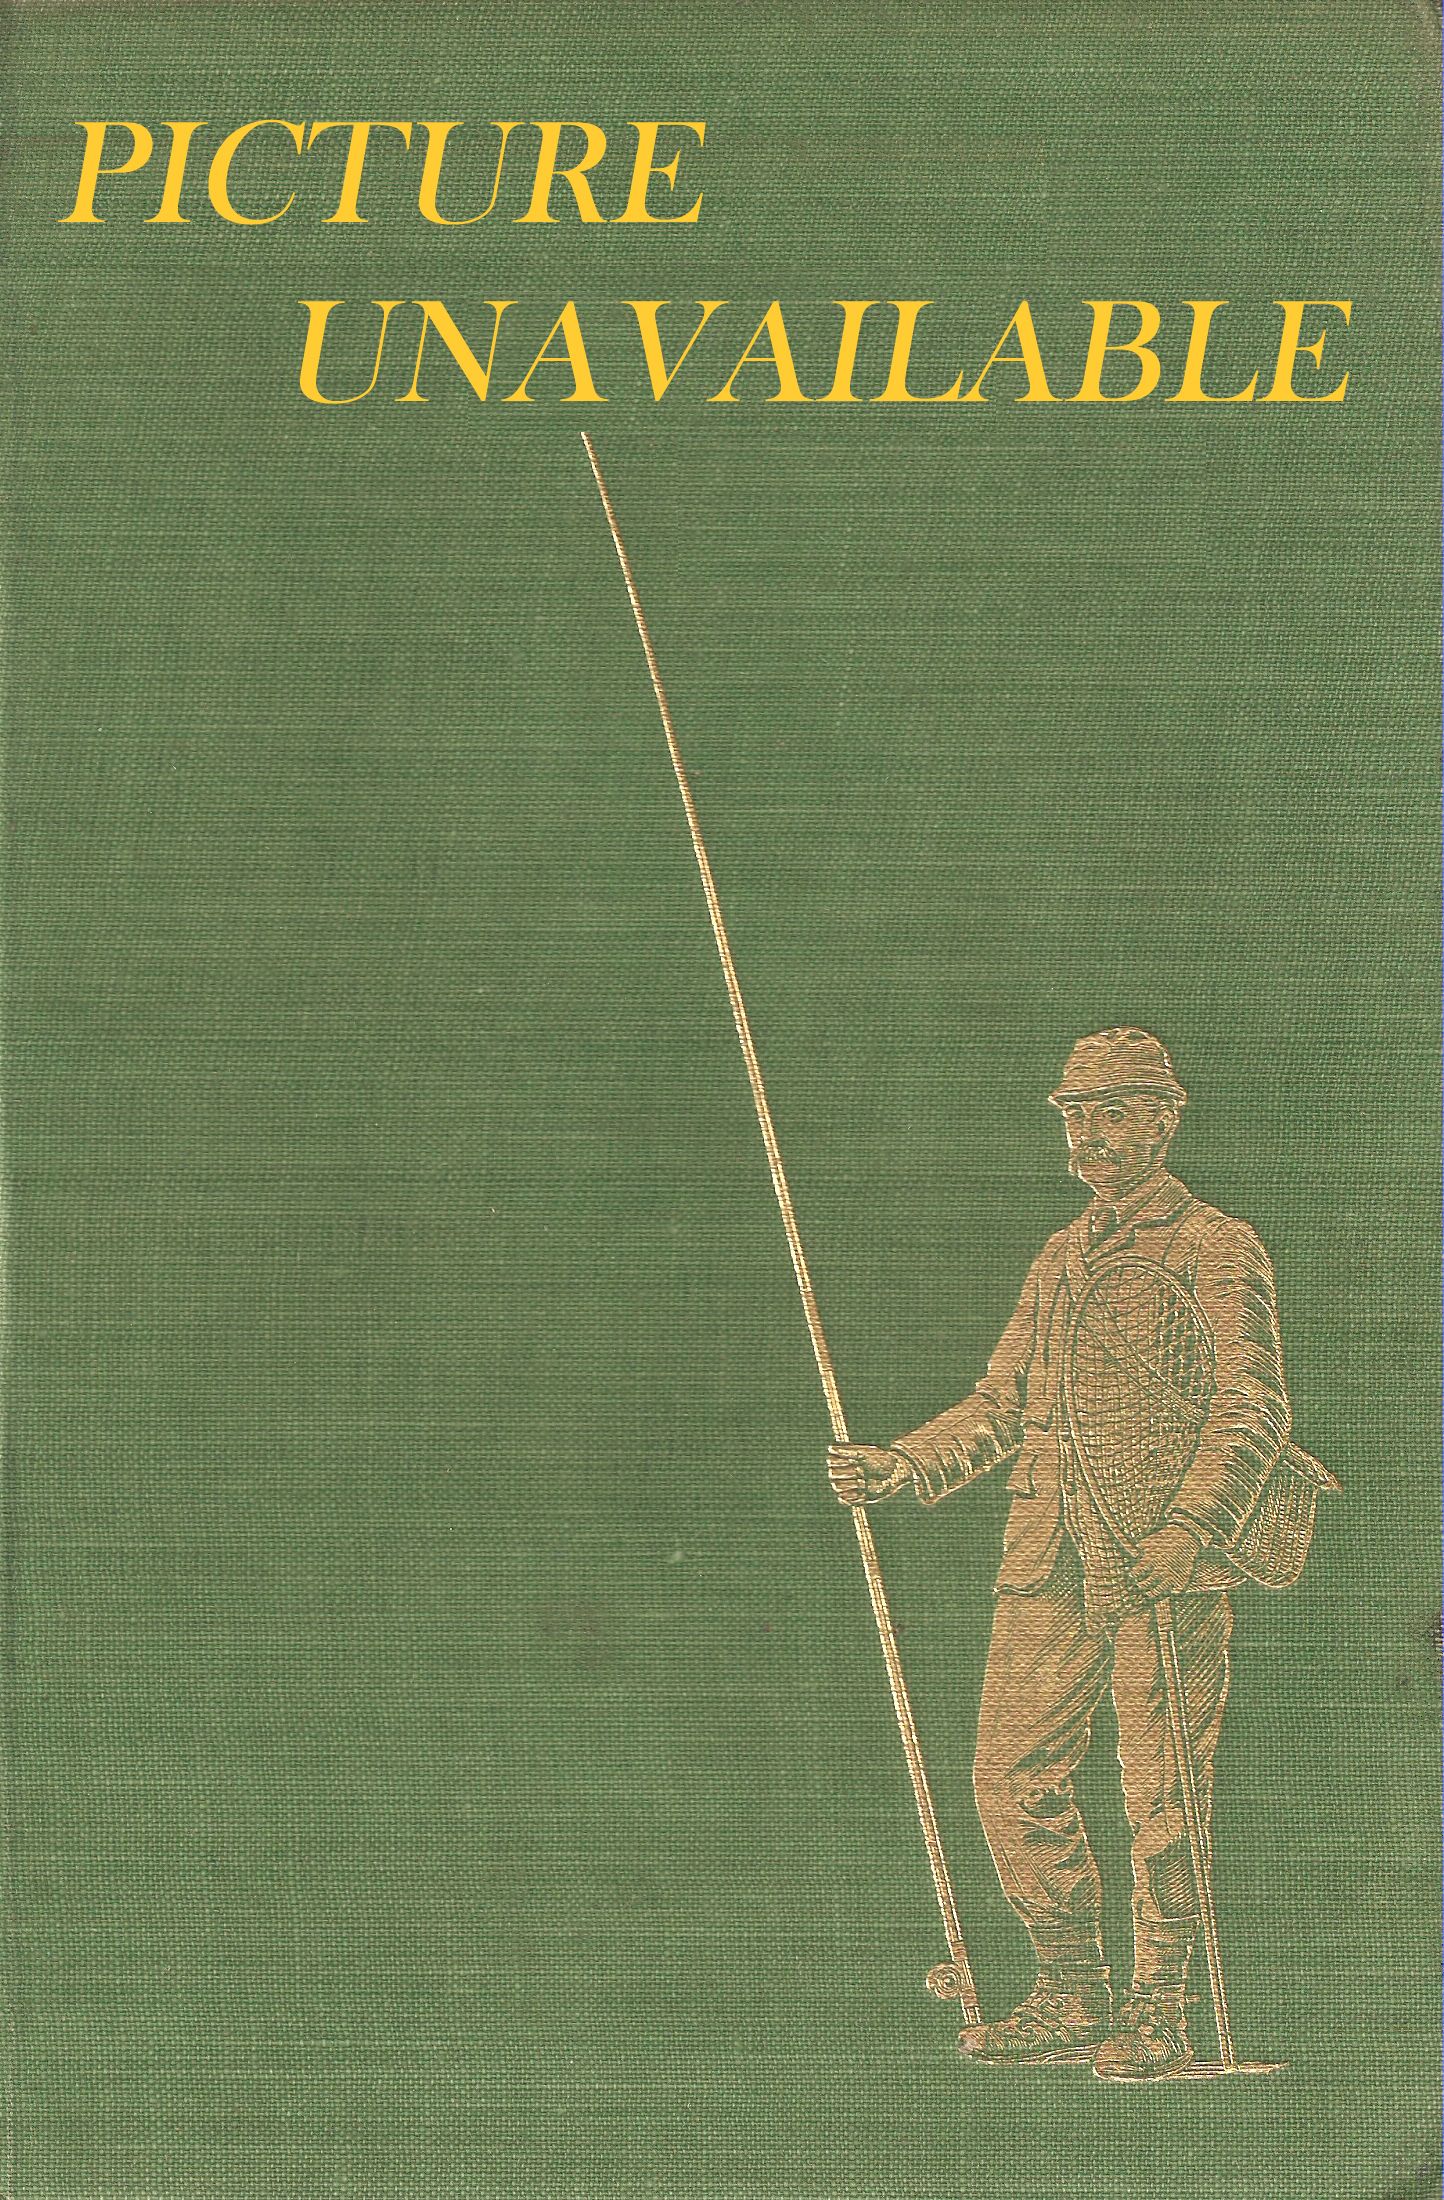 FISHING: A COMPREHENSIVE GUIDE TO FRESHWATER ANGLING. Games and Recreation  Series. By Ernest A. Aris, F.Z.S., S.G.A.